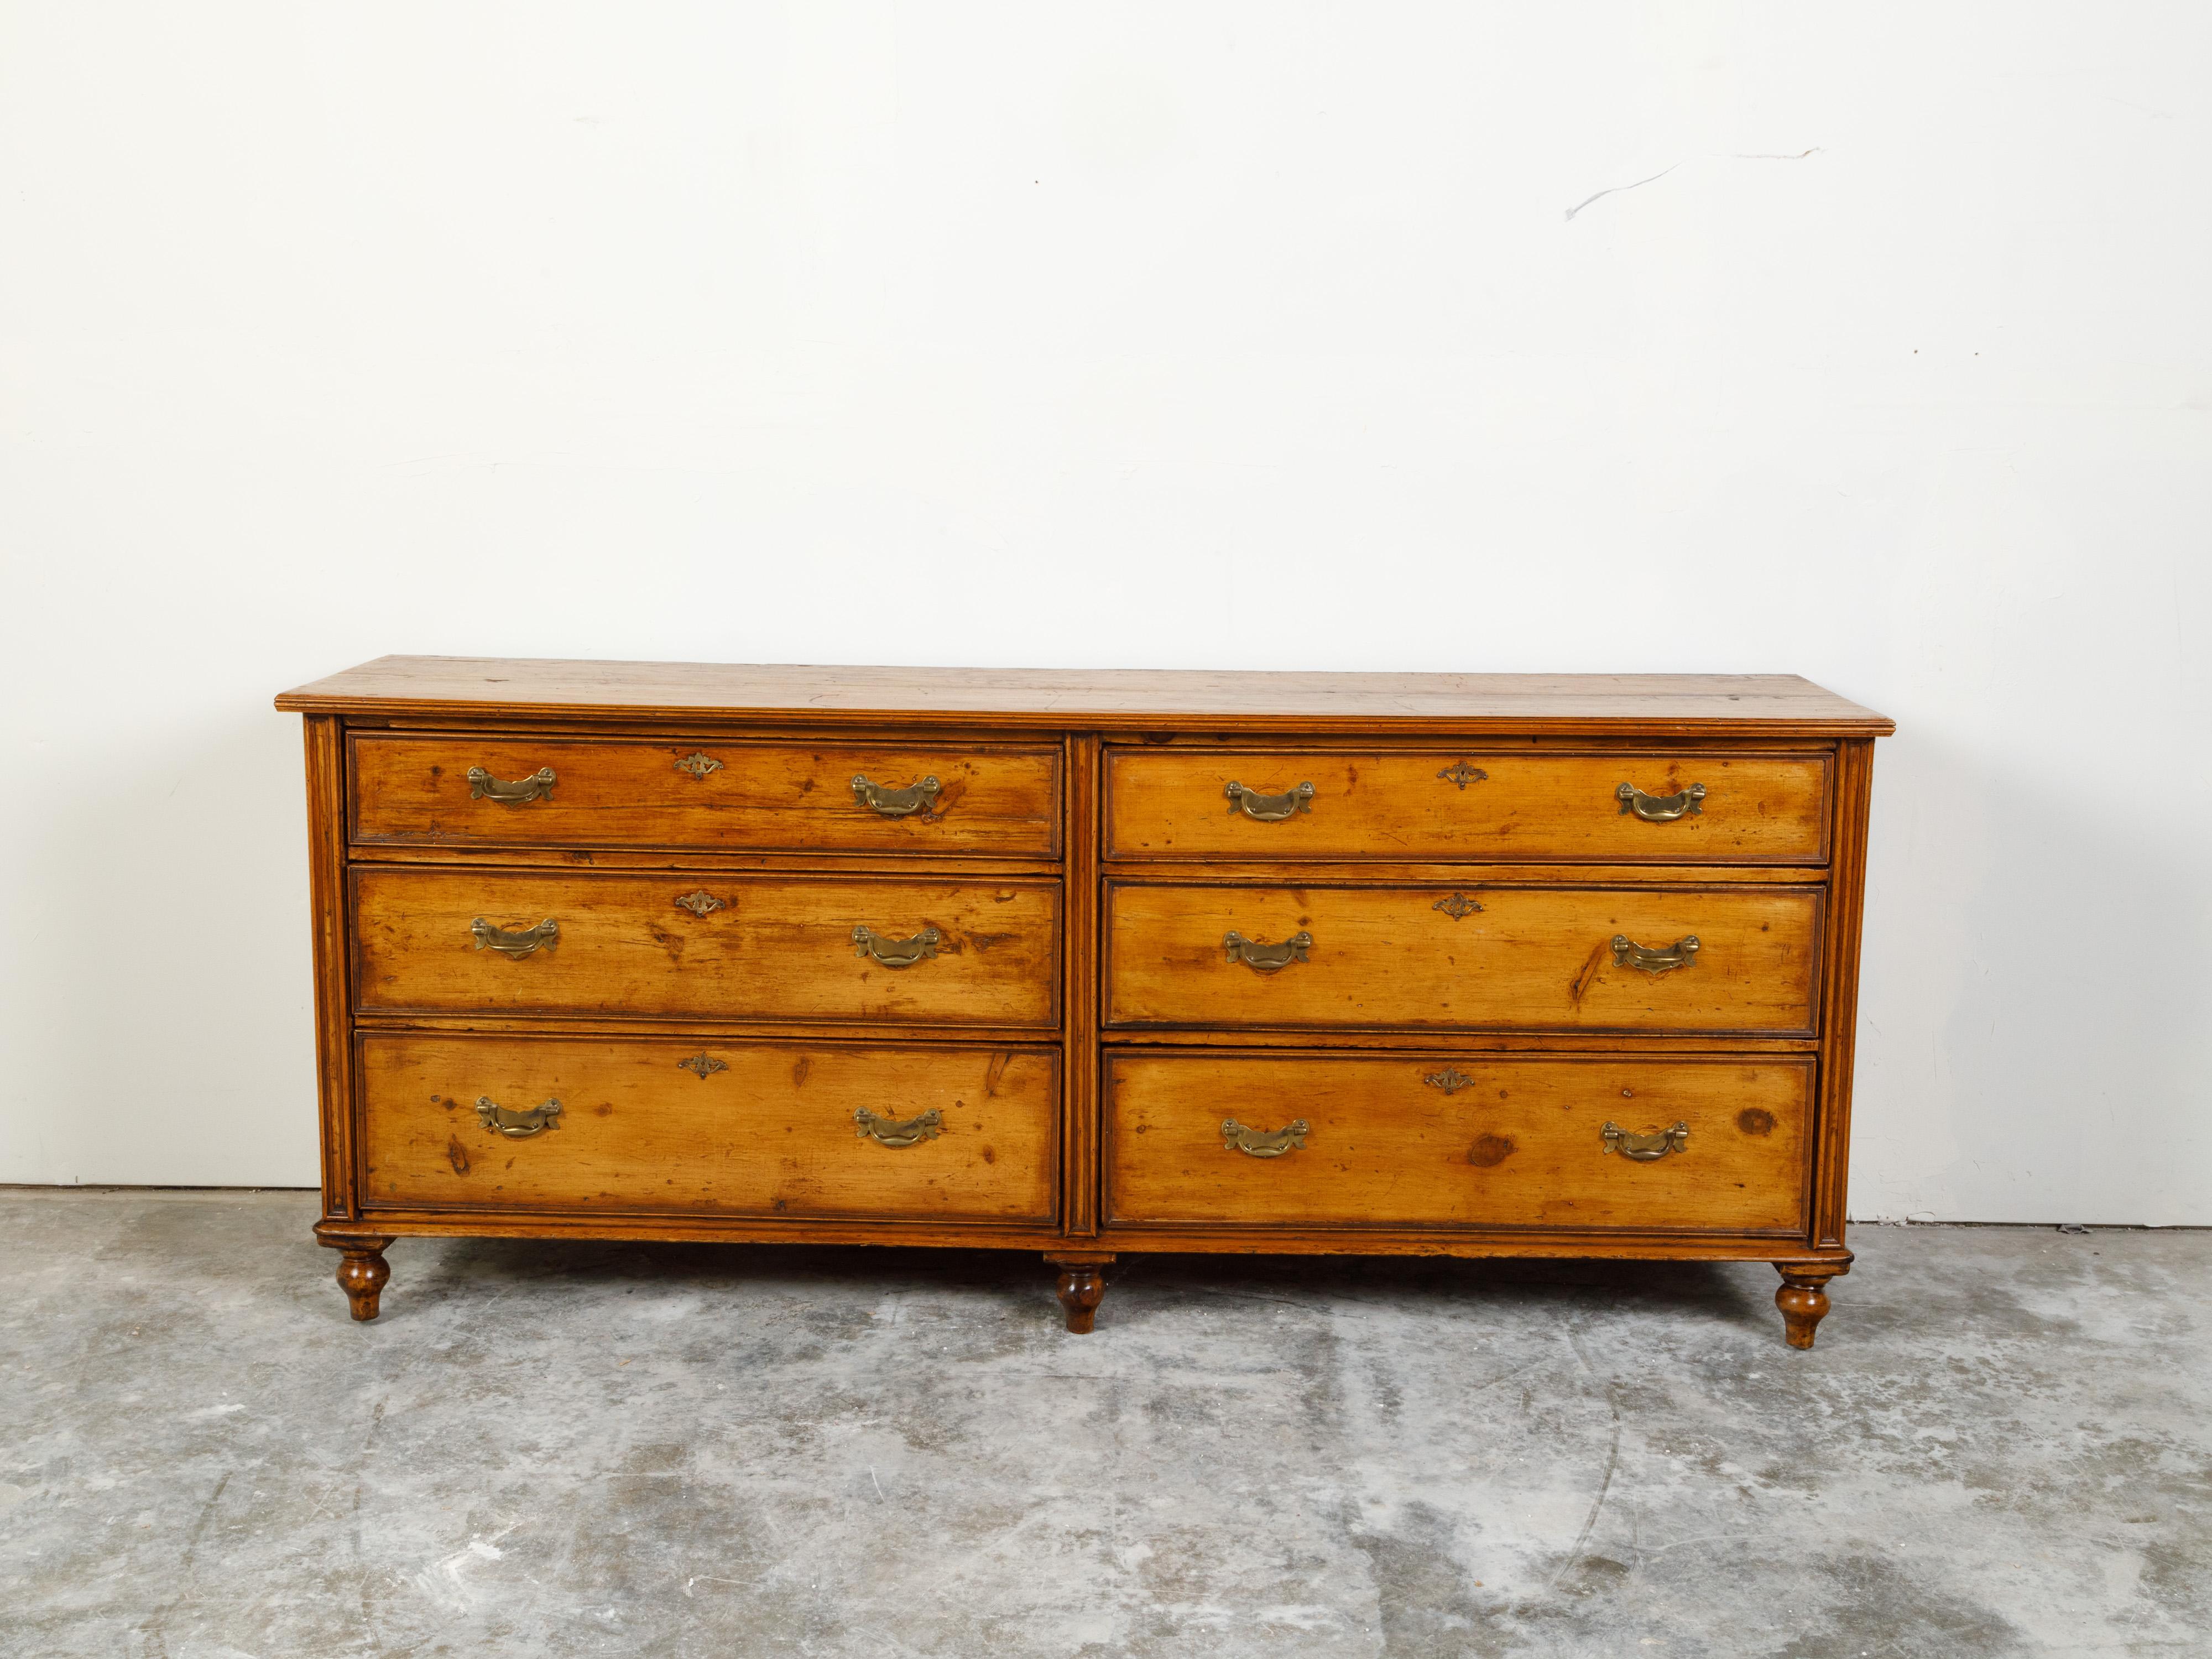 An English pine dresser from the 19th century, with six graduated drawers and brass hardware. Created in England during the 19th century, this pine dresser features a rectangular top sitting above three graduated drawers fitted with brass hardware